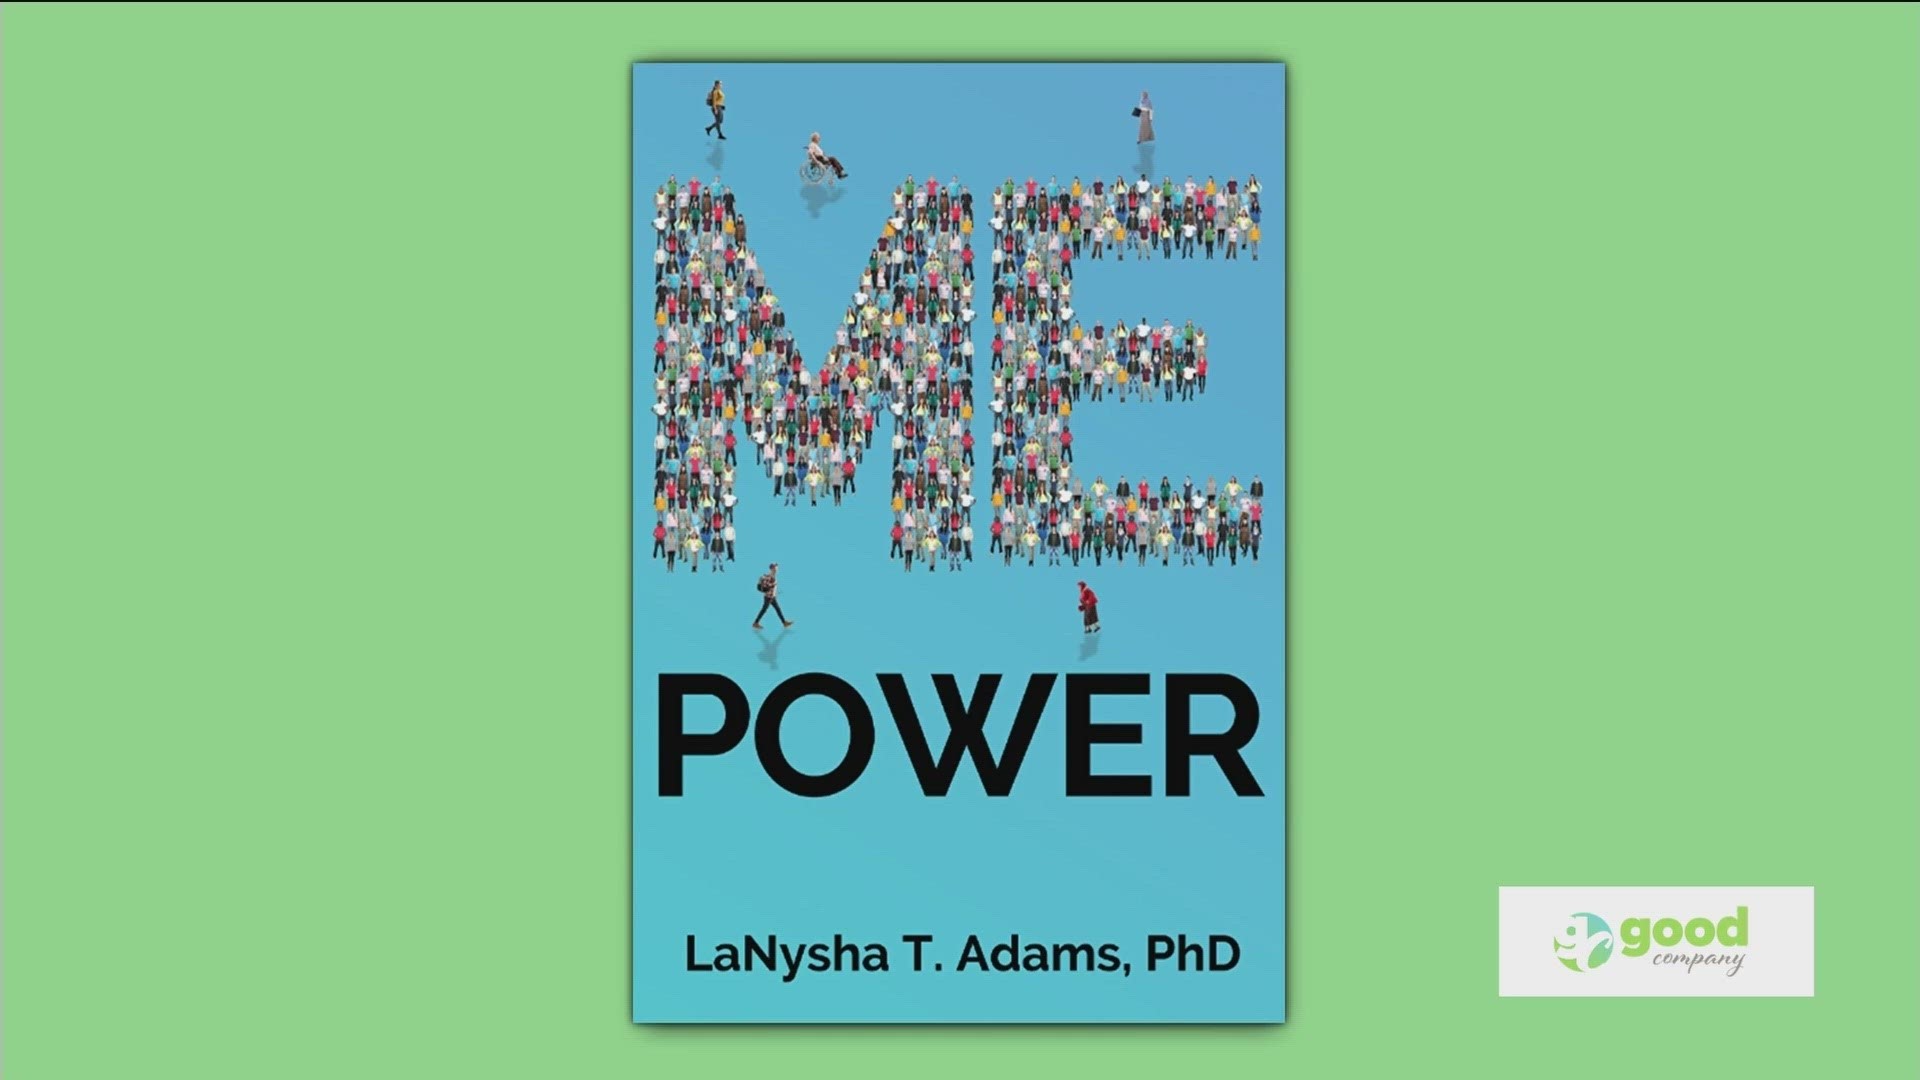 Terry talks with Dr. LaNysha T. Adams about her book, "Me Power," and the importance of knowing heart health tips.